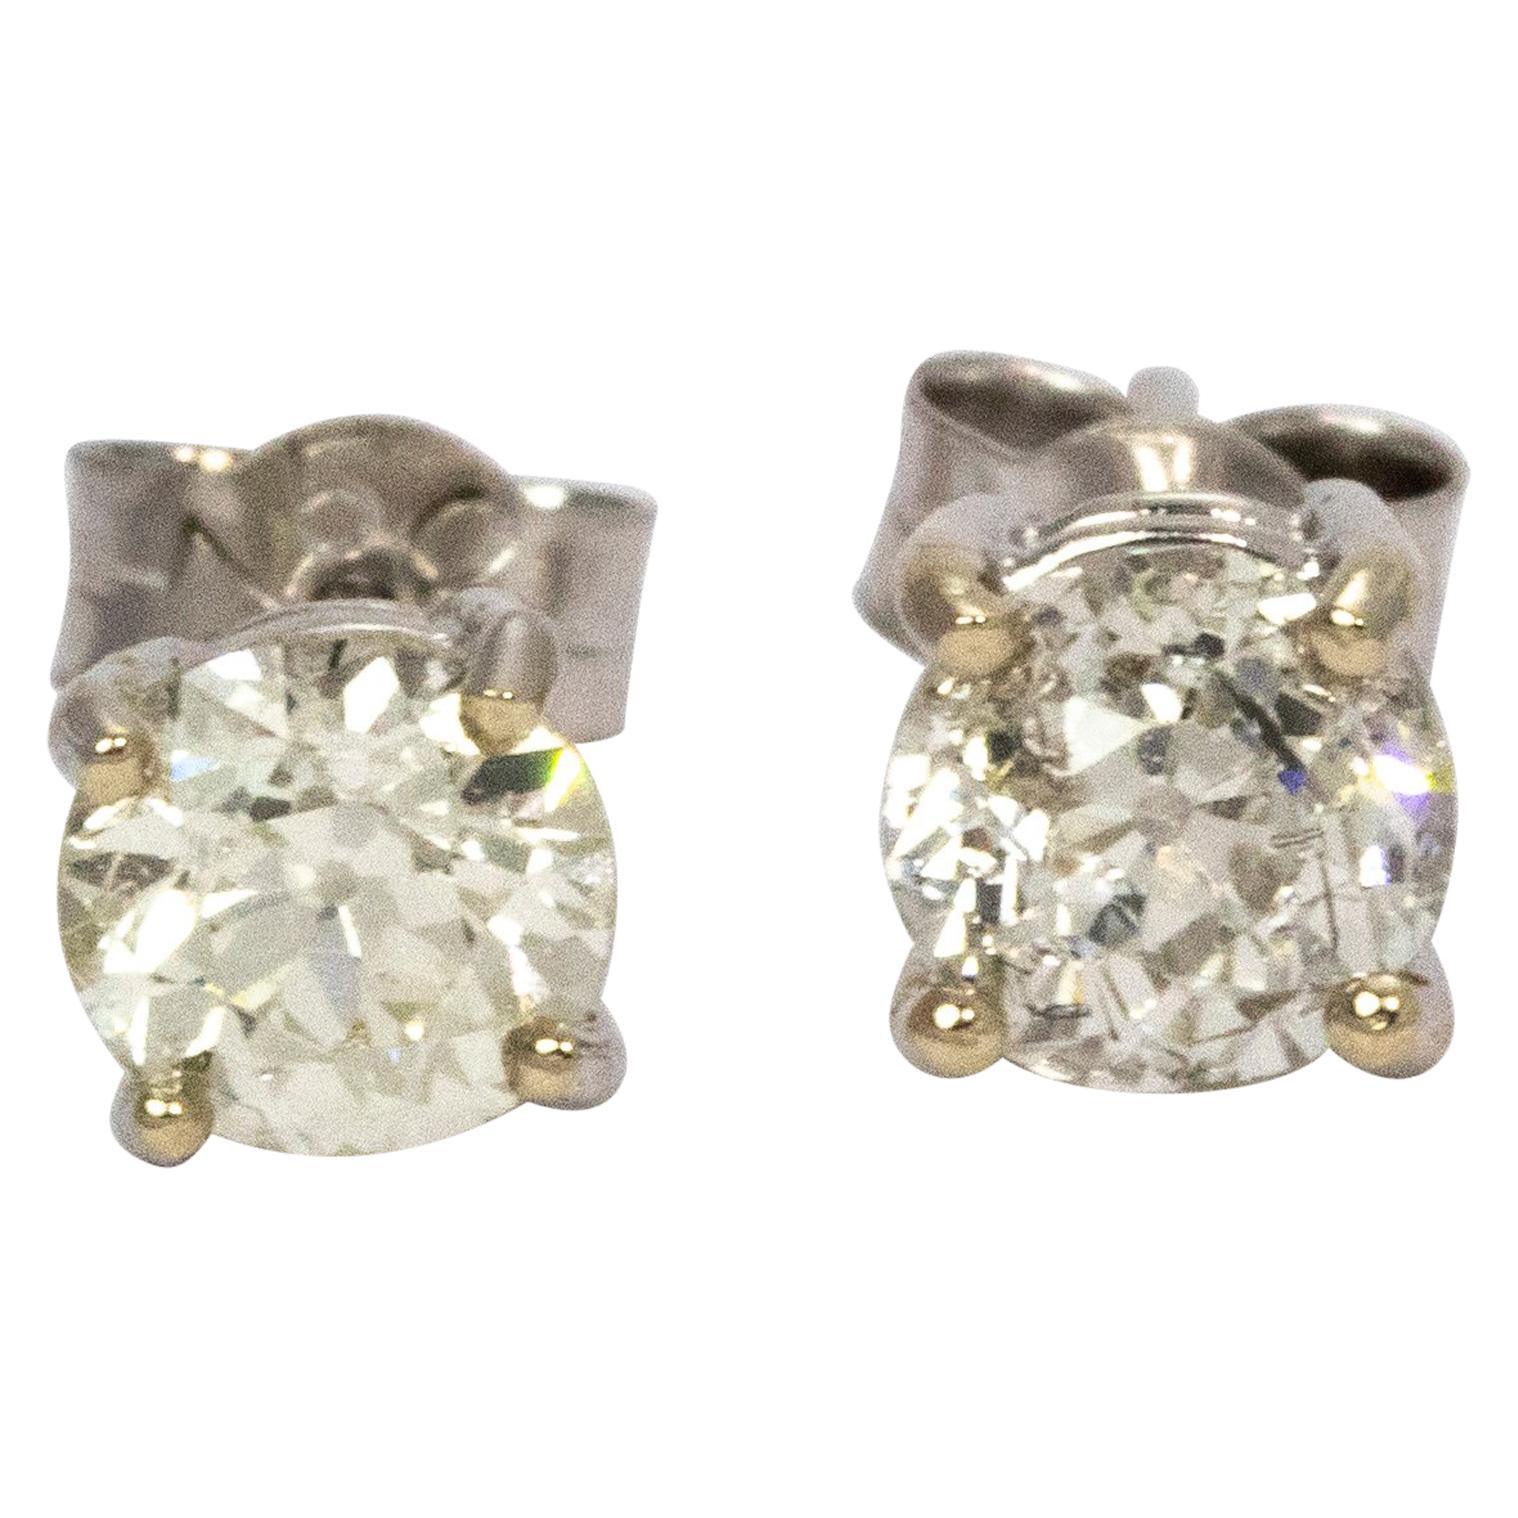 Diamond Stud Earrings 1.34 Total Carat Weight Set in 18 Carat White Gold For Sale